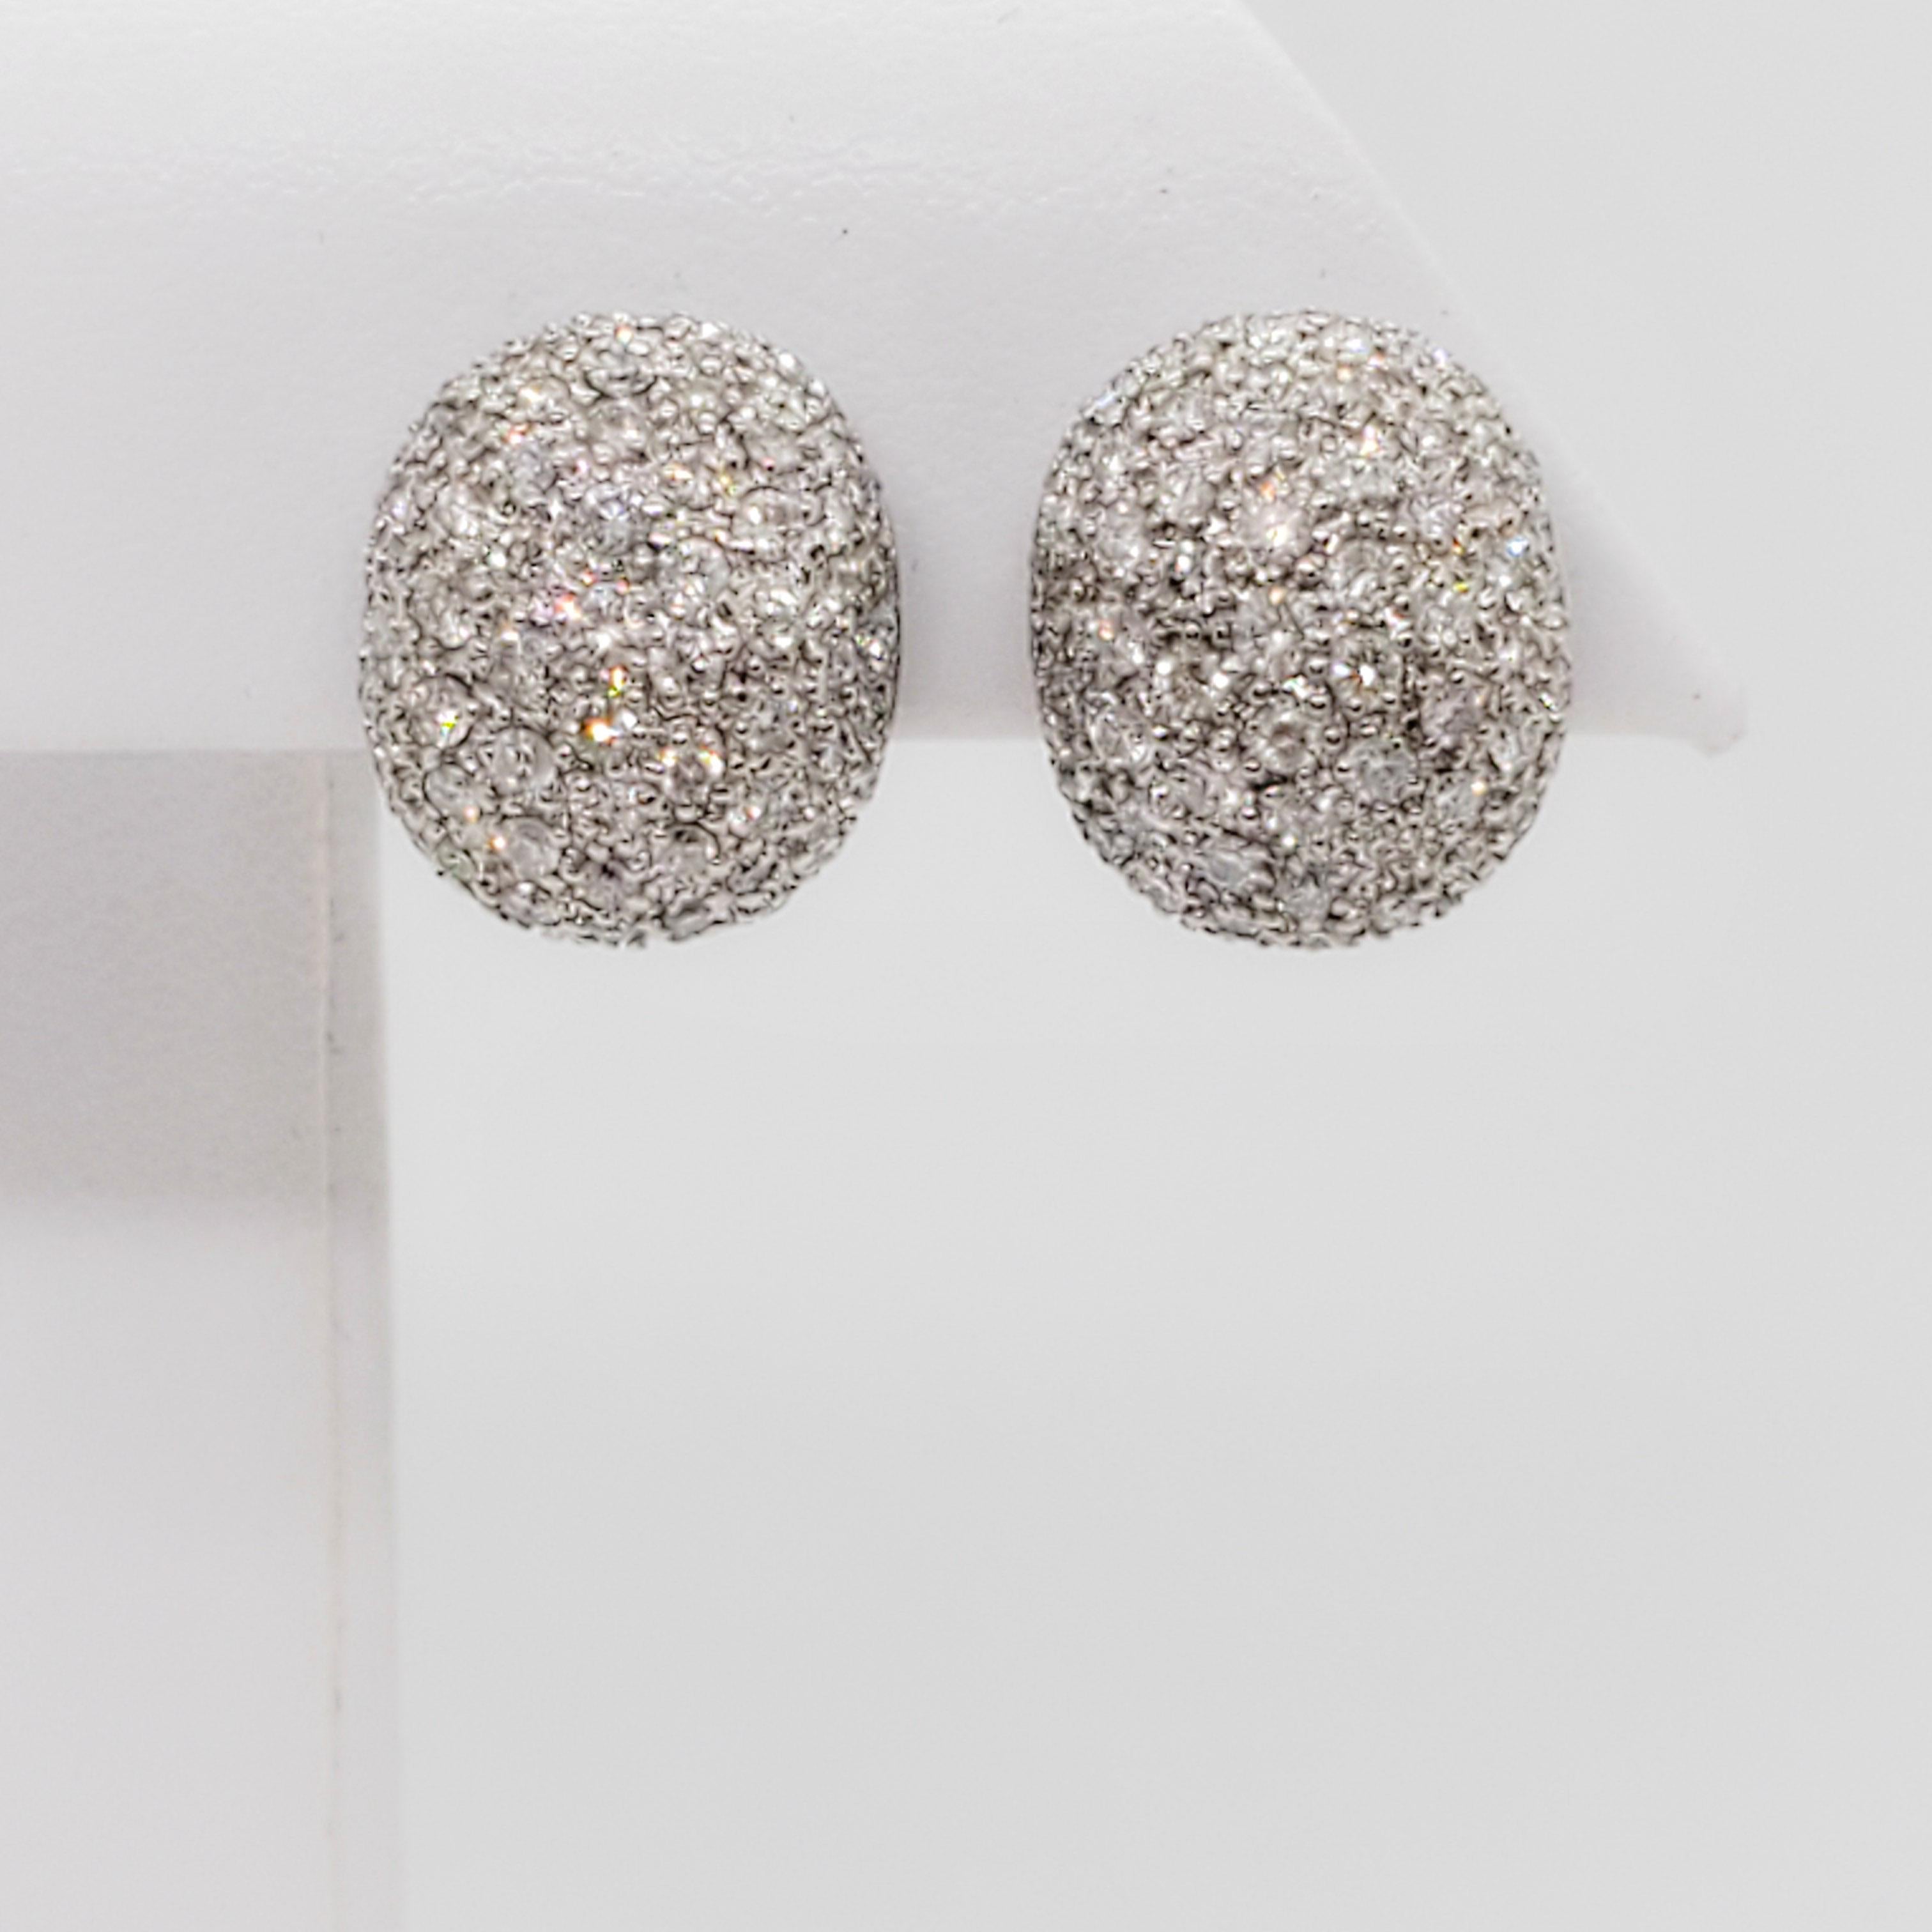 Beautiful white diamond pave earrings with 1.95 ct. of good quality, white, and bright diamond rounds. Handmade 18k white gold mountings.